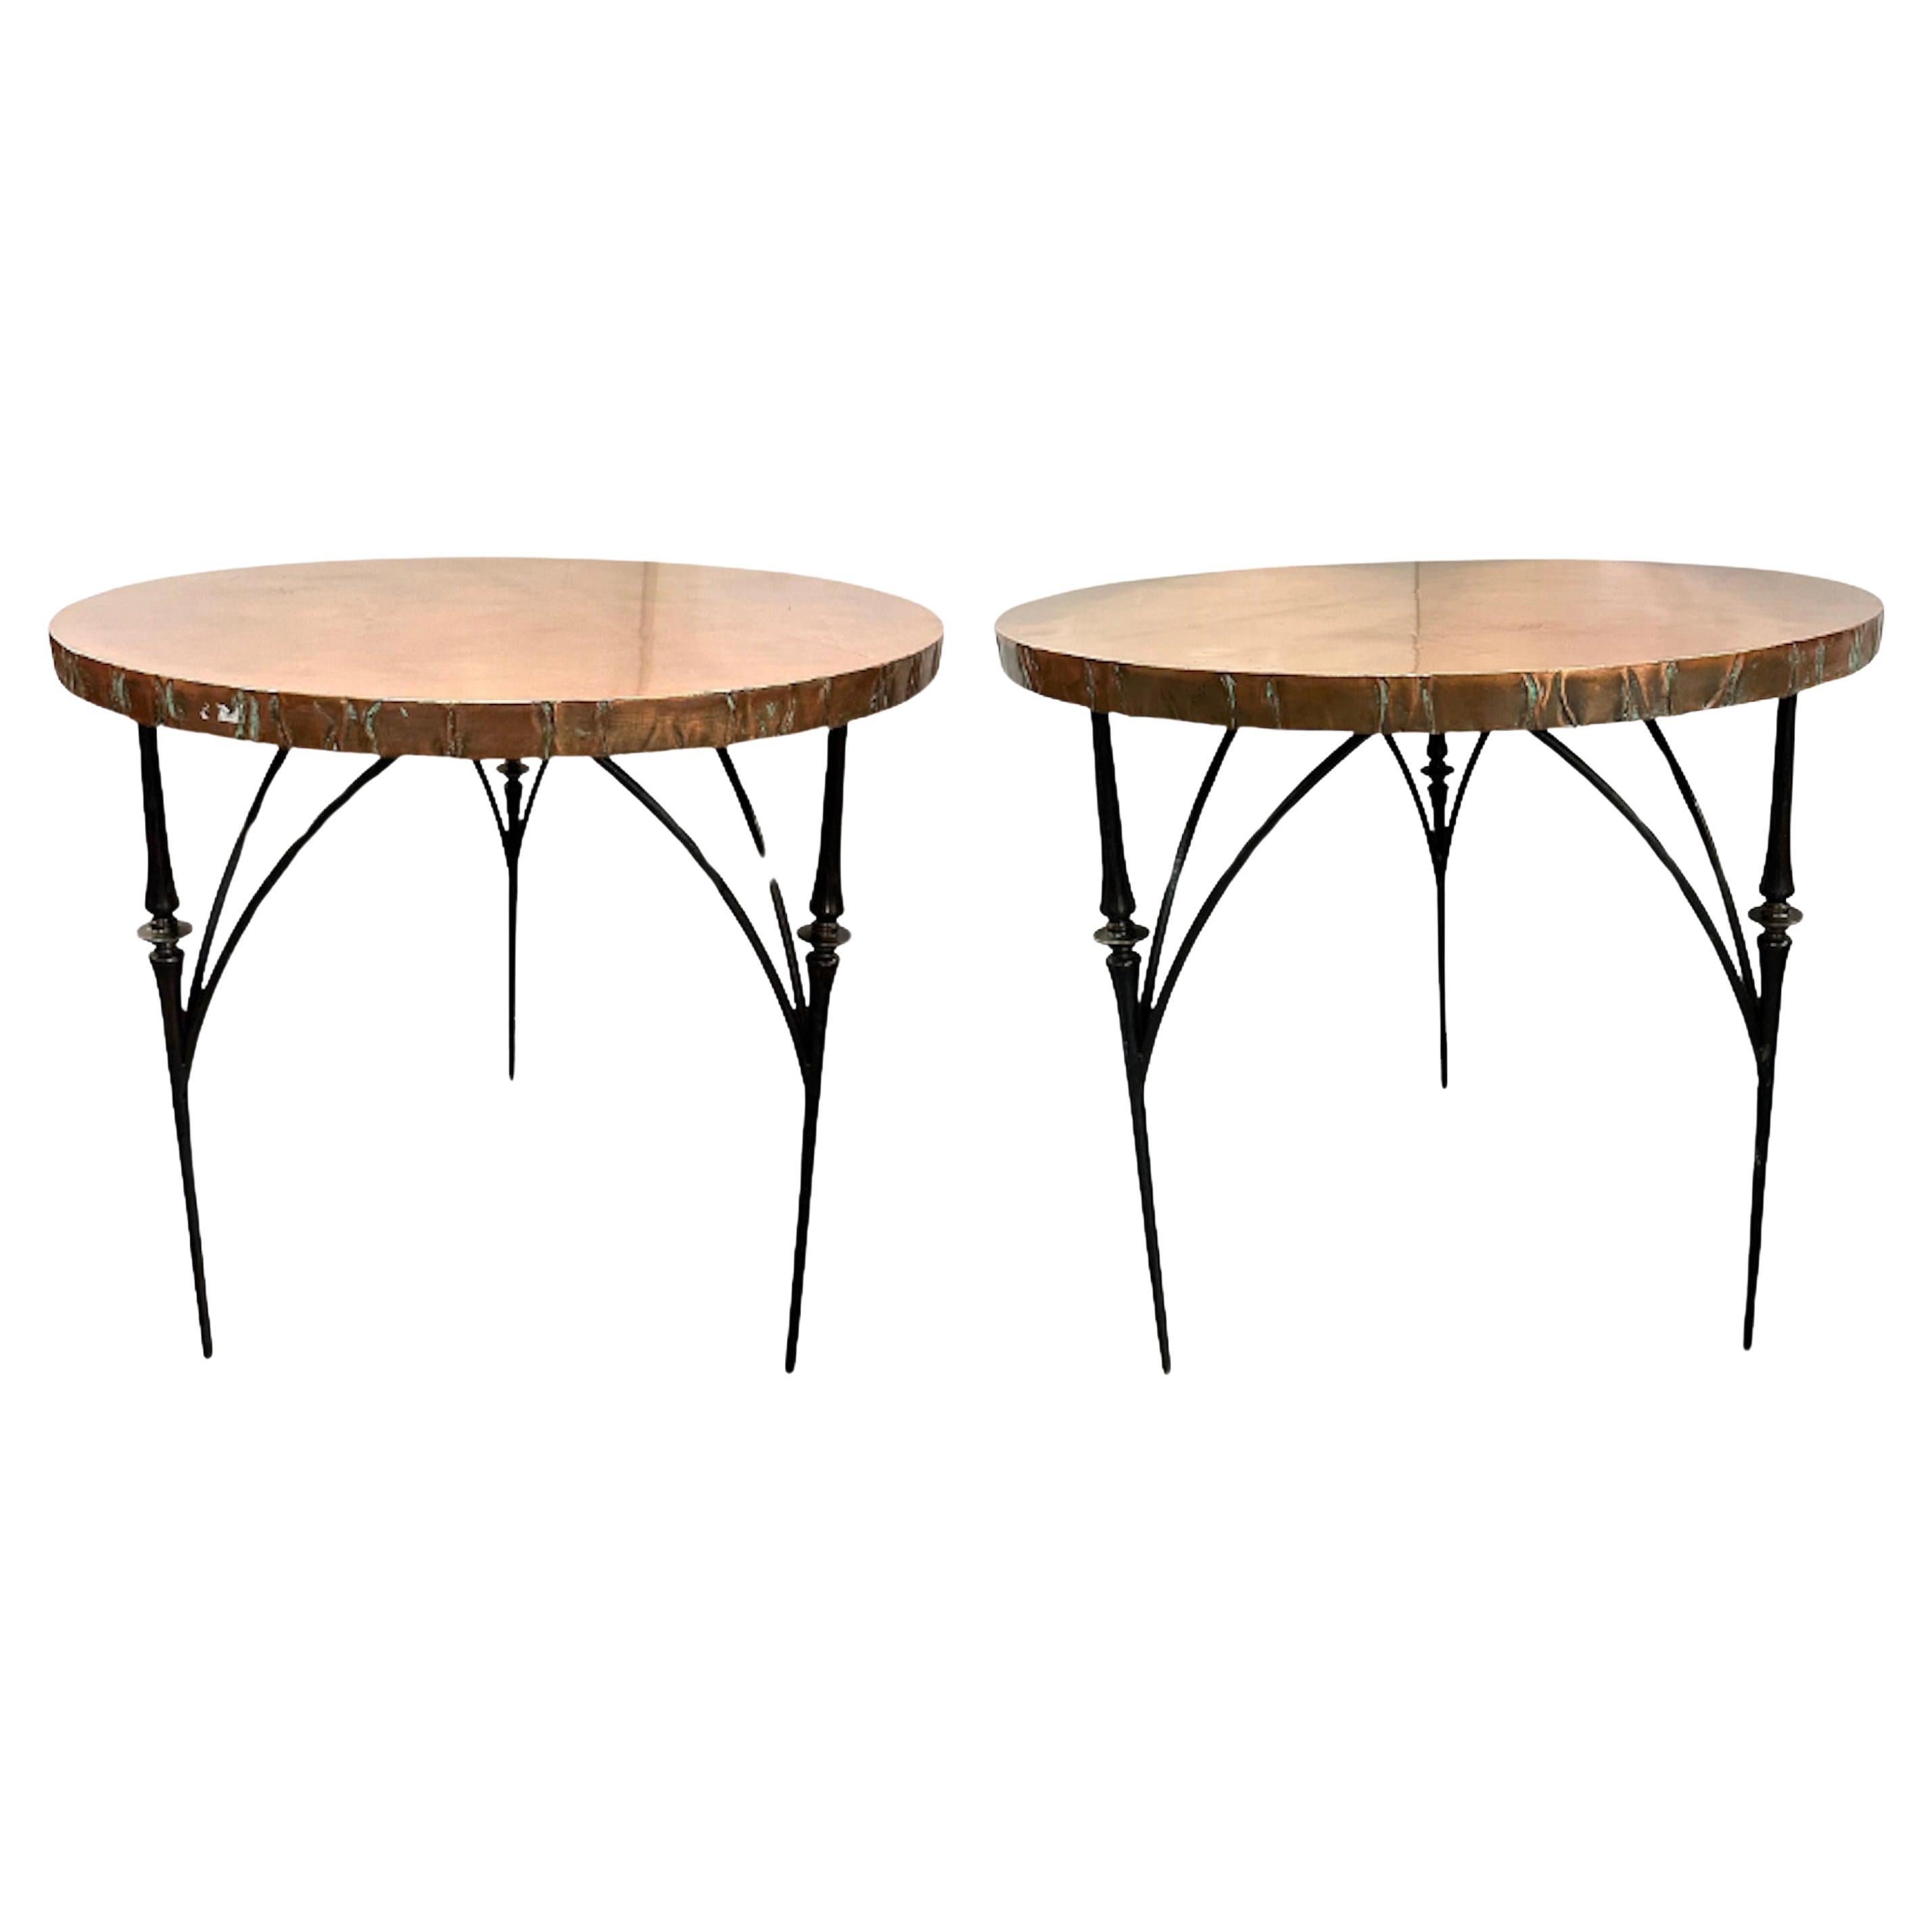 Set of Copper Topped Side Tables